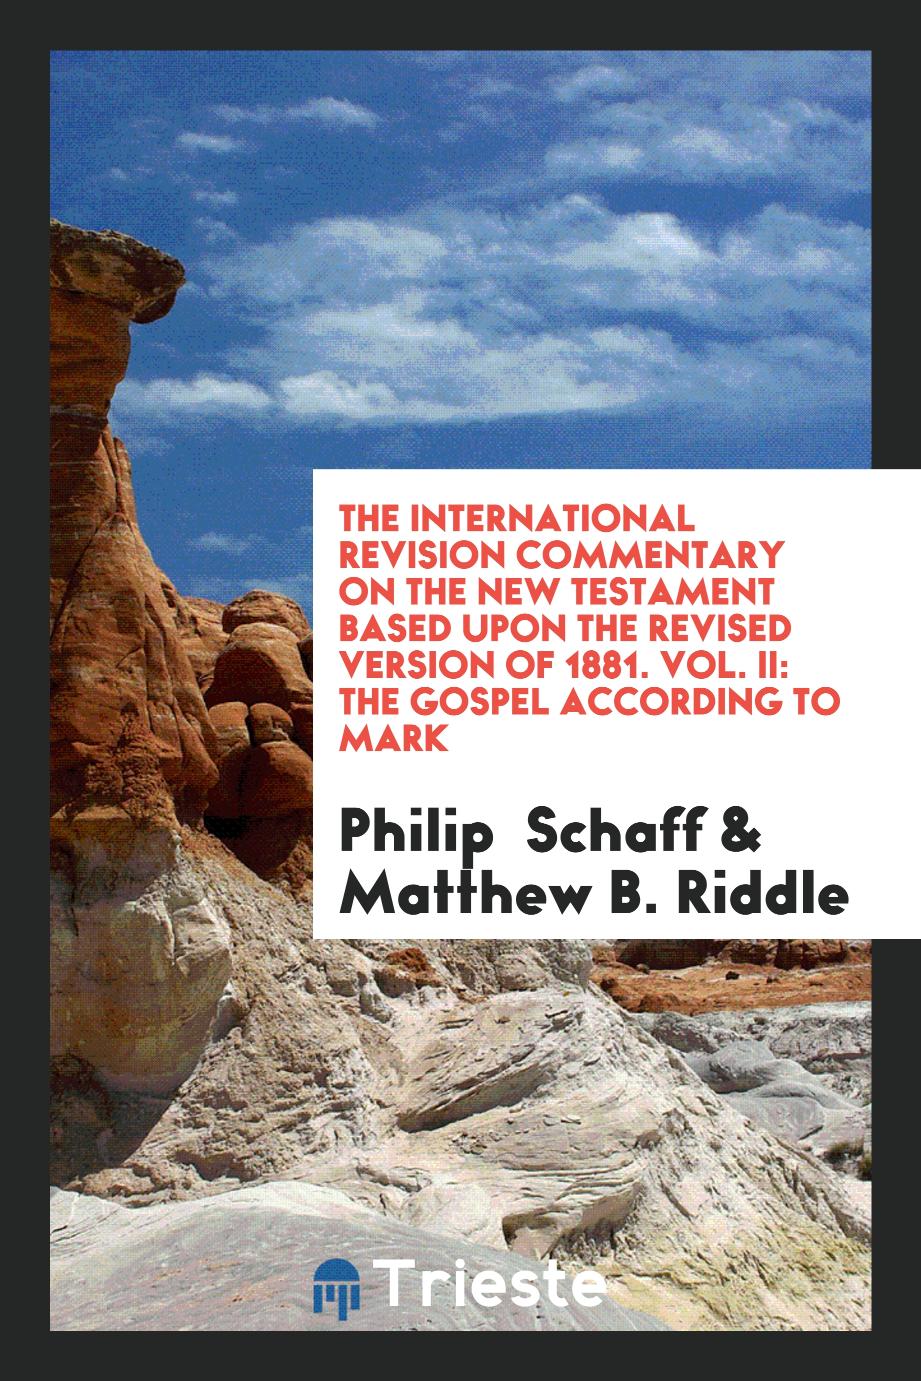 Philip Schaff, Matthew B. Riddle - The International Revision Commentary on the New Testament Based upon the Revised Version of 1881. Vol. II: The Gospel According to Mark